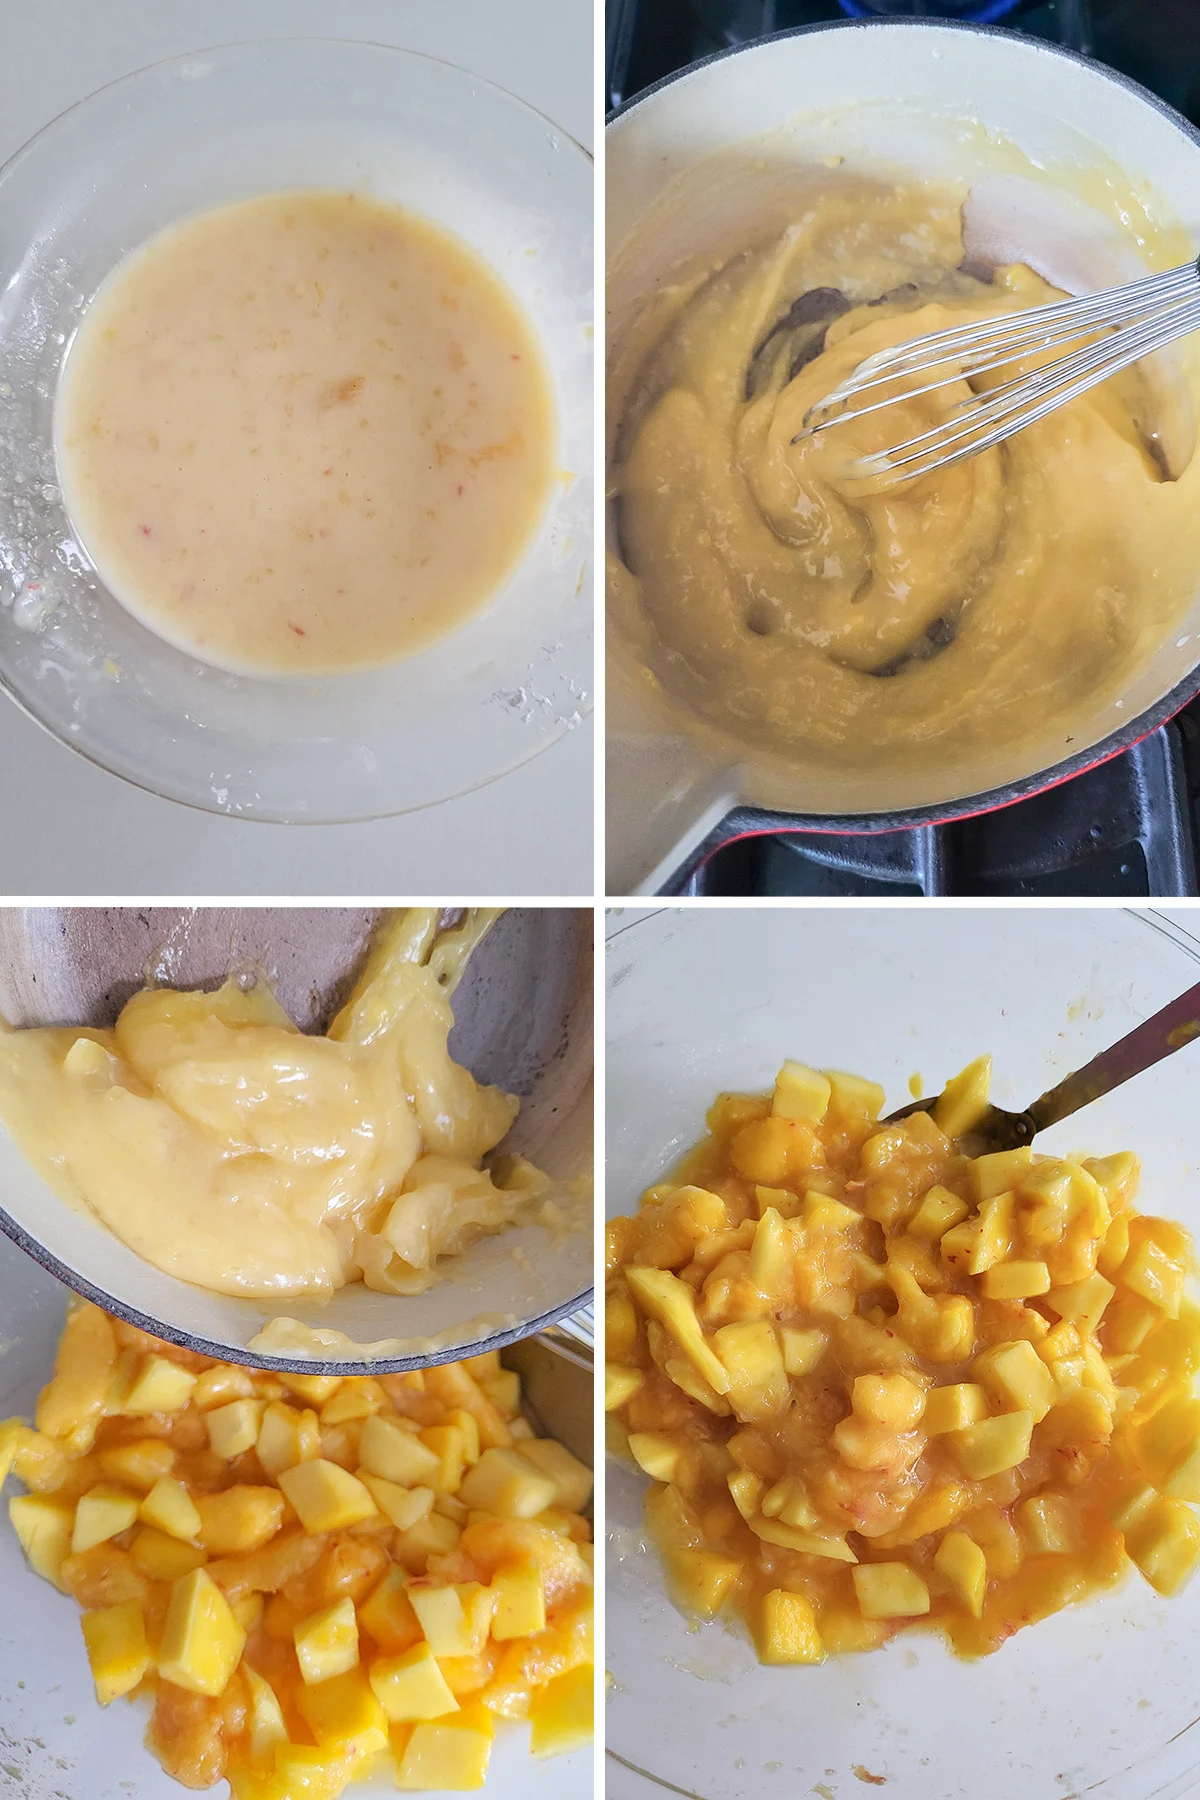 A bowl with corn starch and juice. Cornstarch and juice cooked until thick in a pan. A bowl of peach and mango pieces mixed with thickened juice.